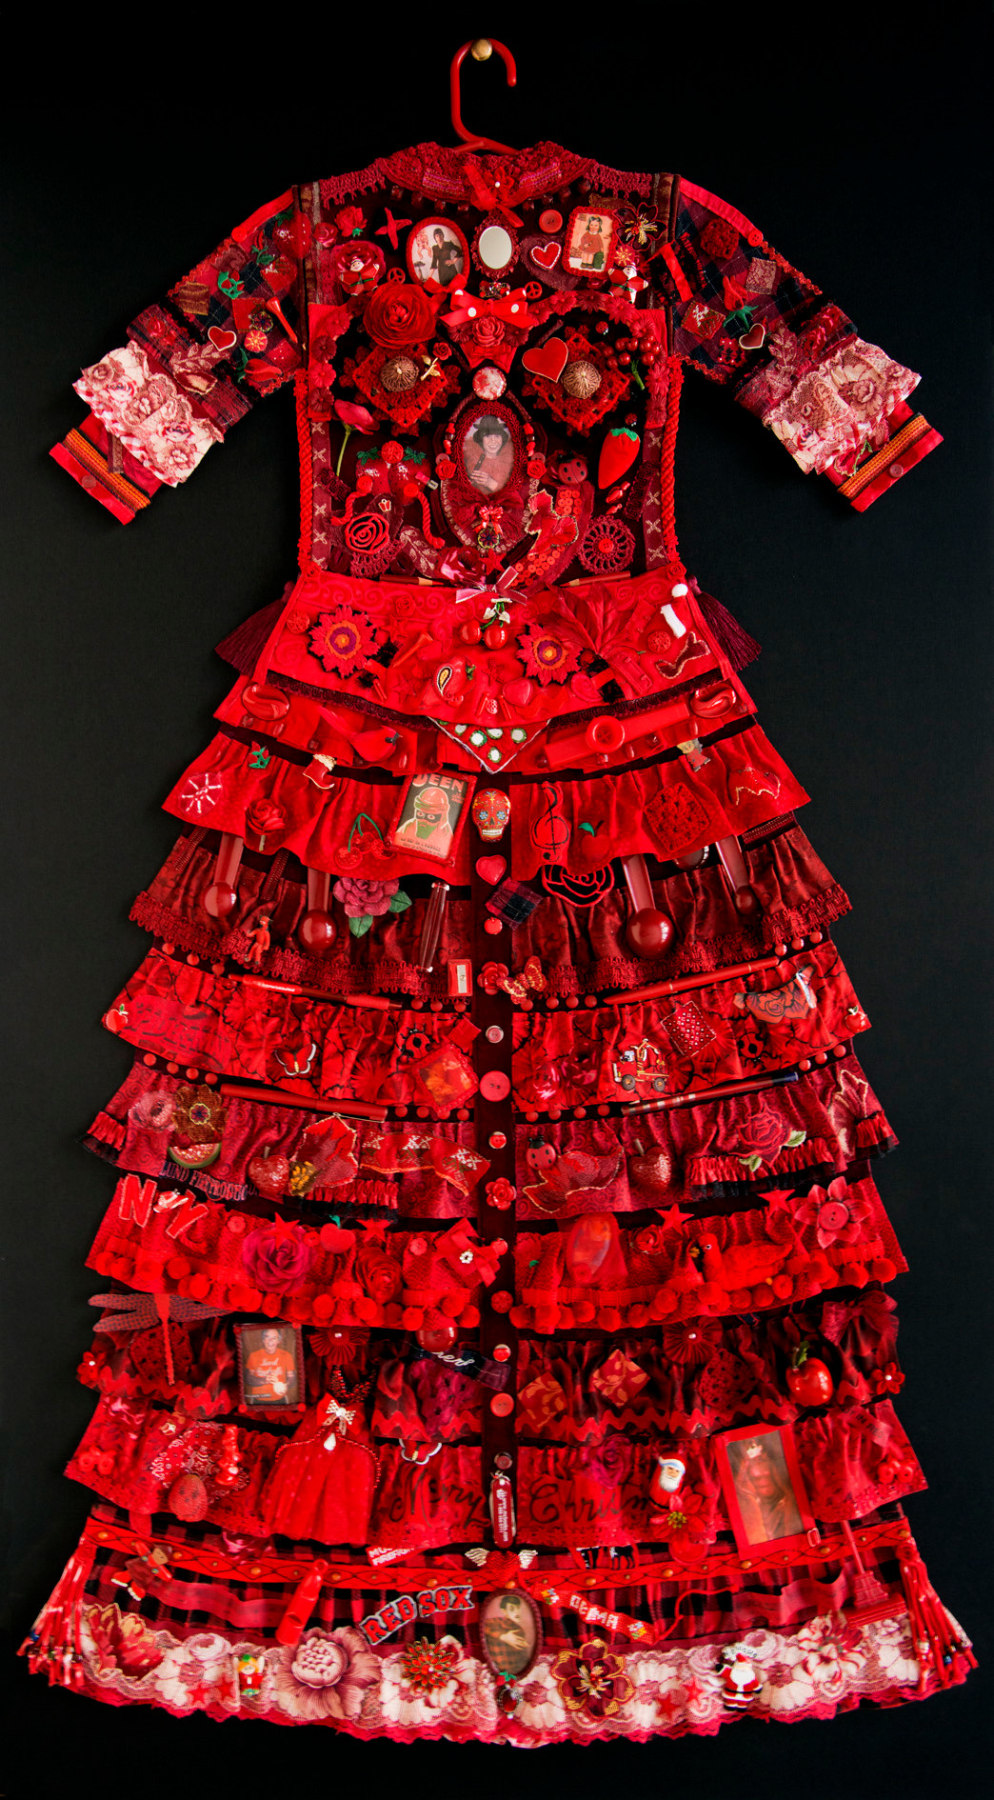 jane lund, Red Dress, 2013, assemblage of collected objects, 59 x 33 inches